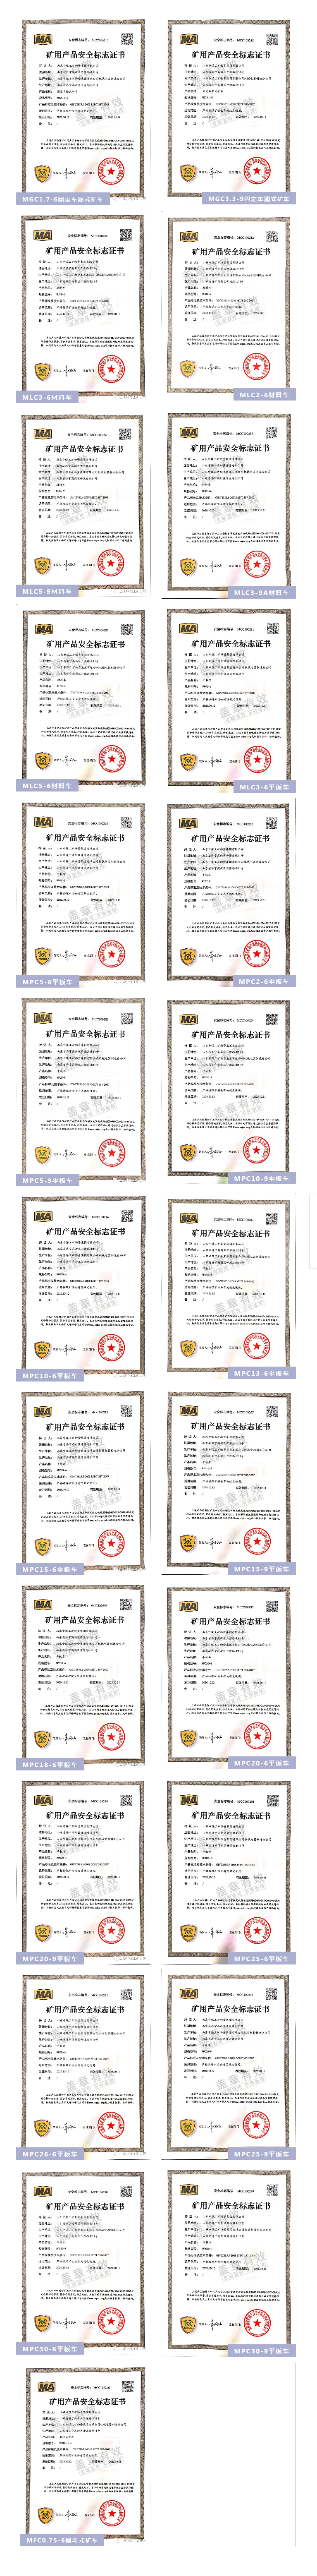 Congratulations To The 25 Mining Products Of China Coal Group For Successfully Passing The Review Of The National Mining Product Safety Mark Center